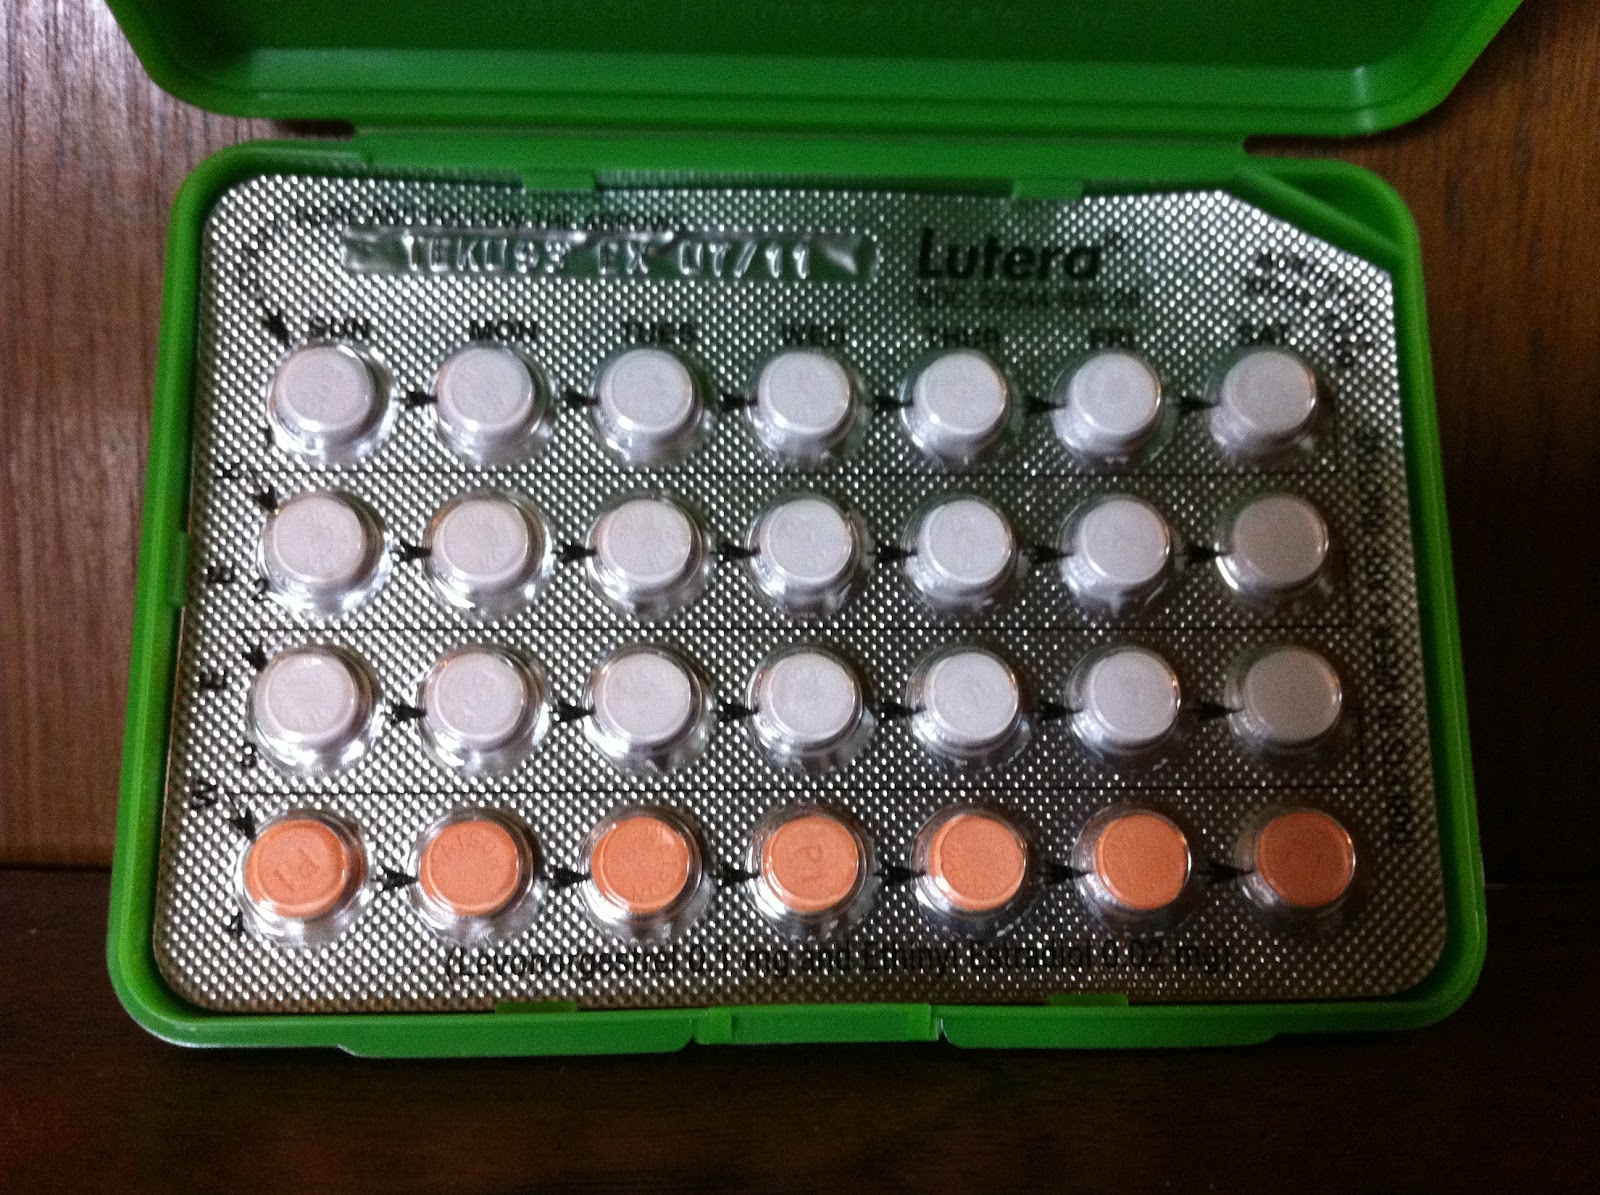 Package of birth control pills in a green container.